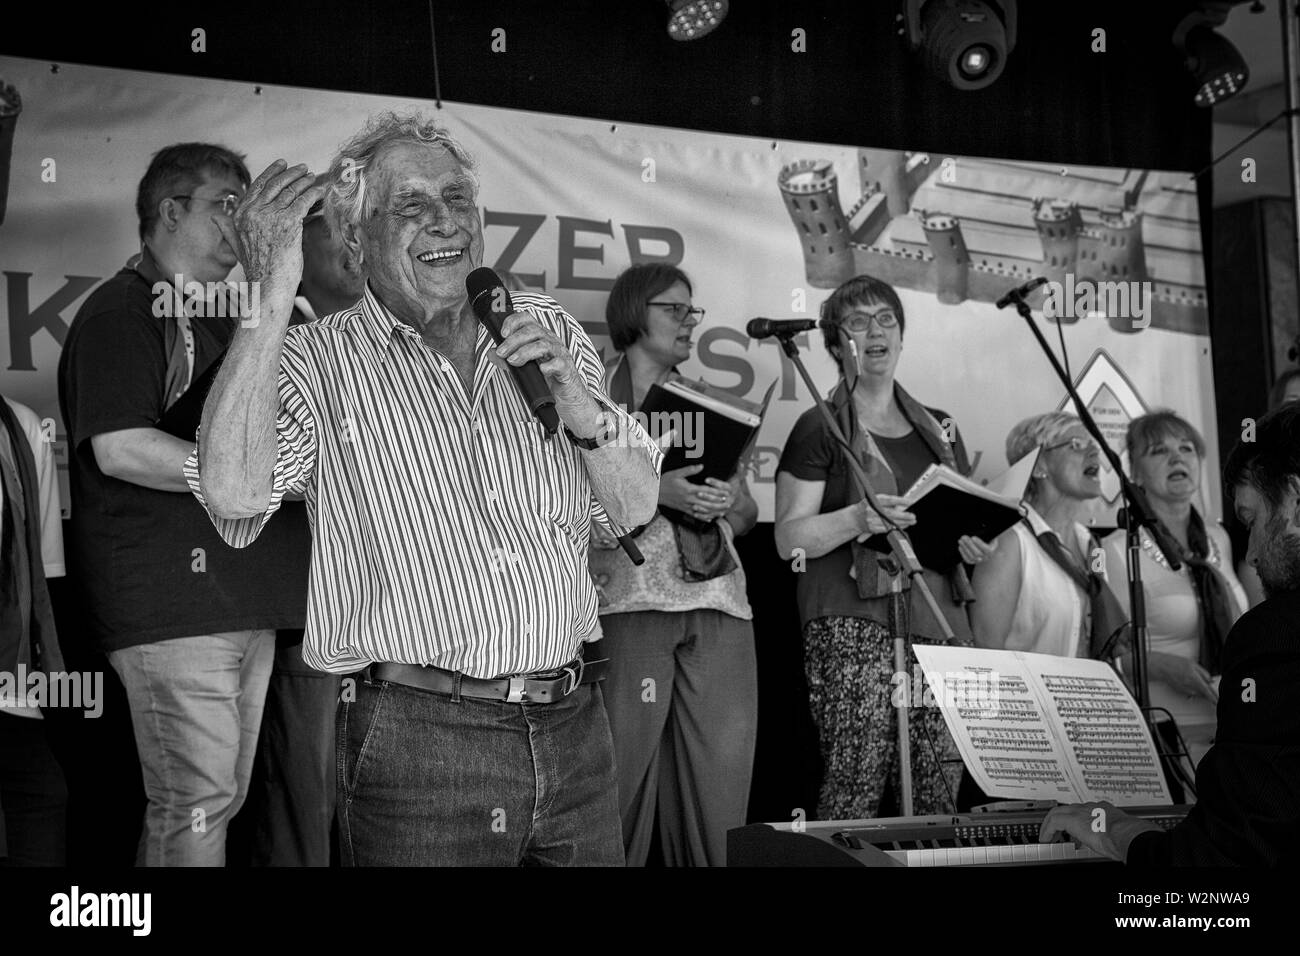 the 93 year old singer Ludwig Sebus at a gig in the district Deutz, Cologne, Germany.  der 93 Jahre alte Saenger Ludwig Sebus bei einem Auftritt in De Stock Photo